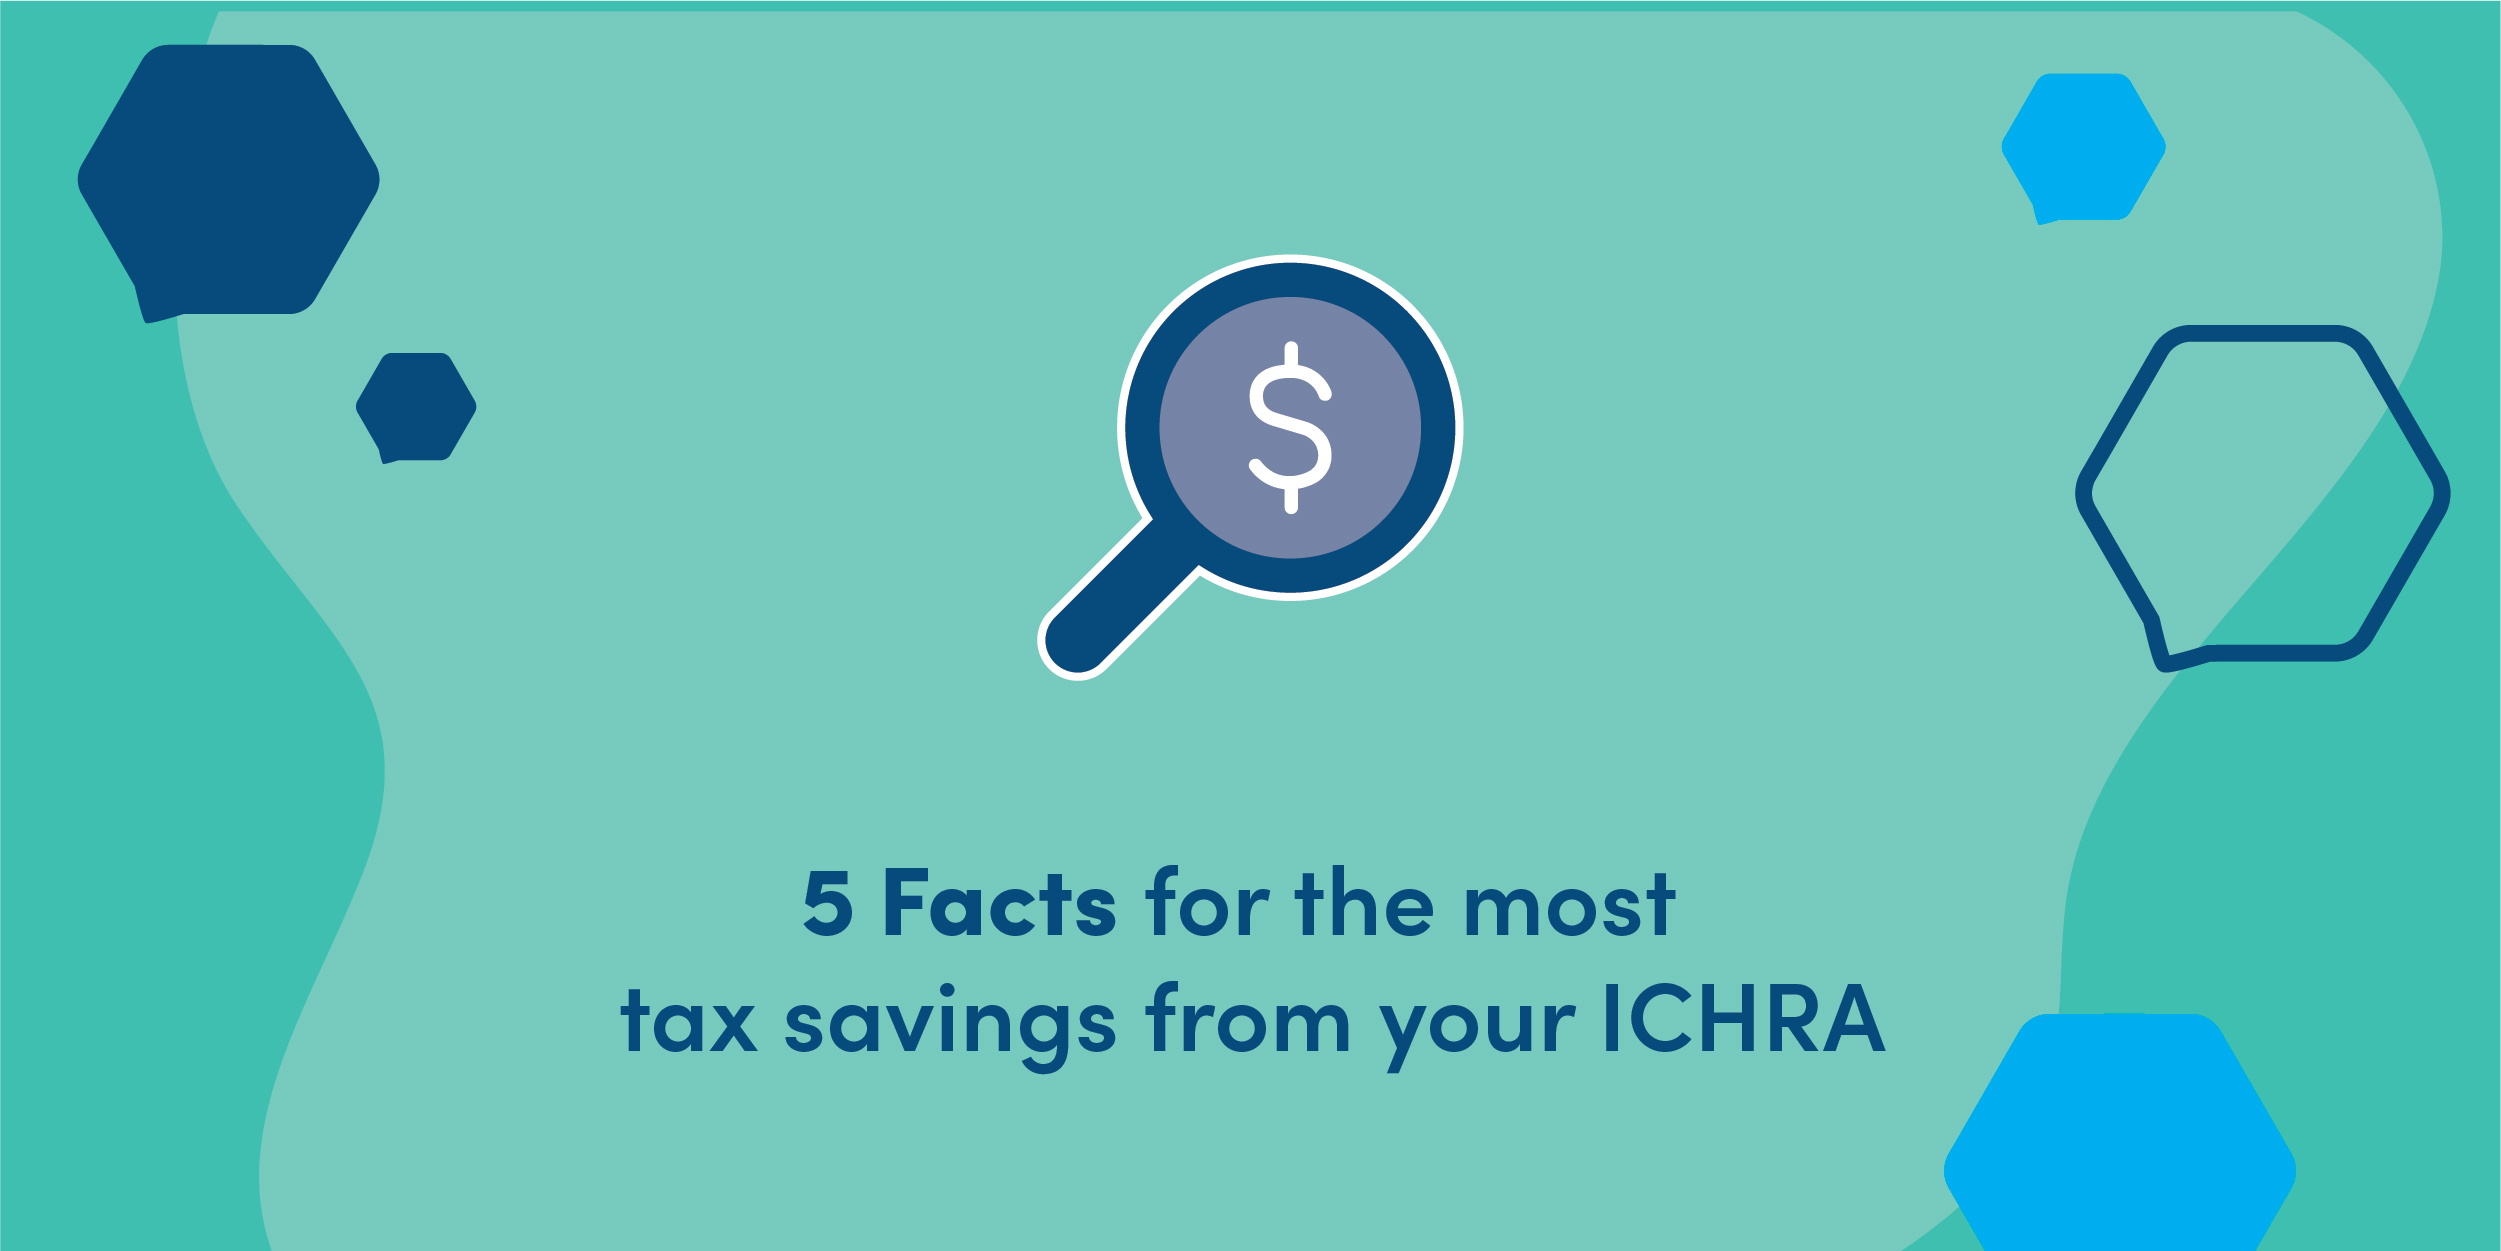 5 Facts for the most tax savings from your ICHRA